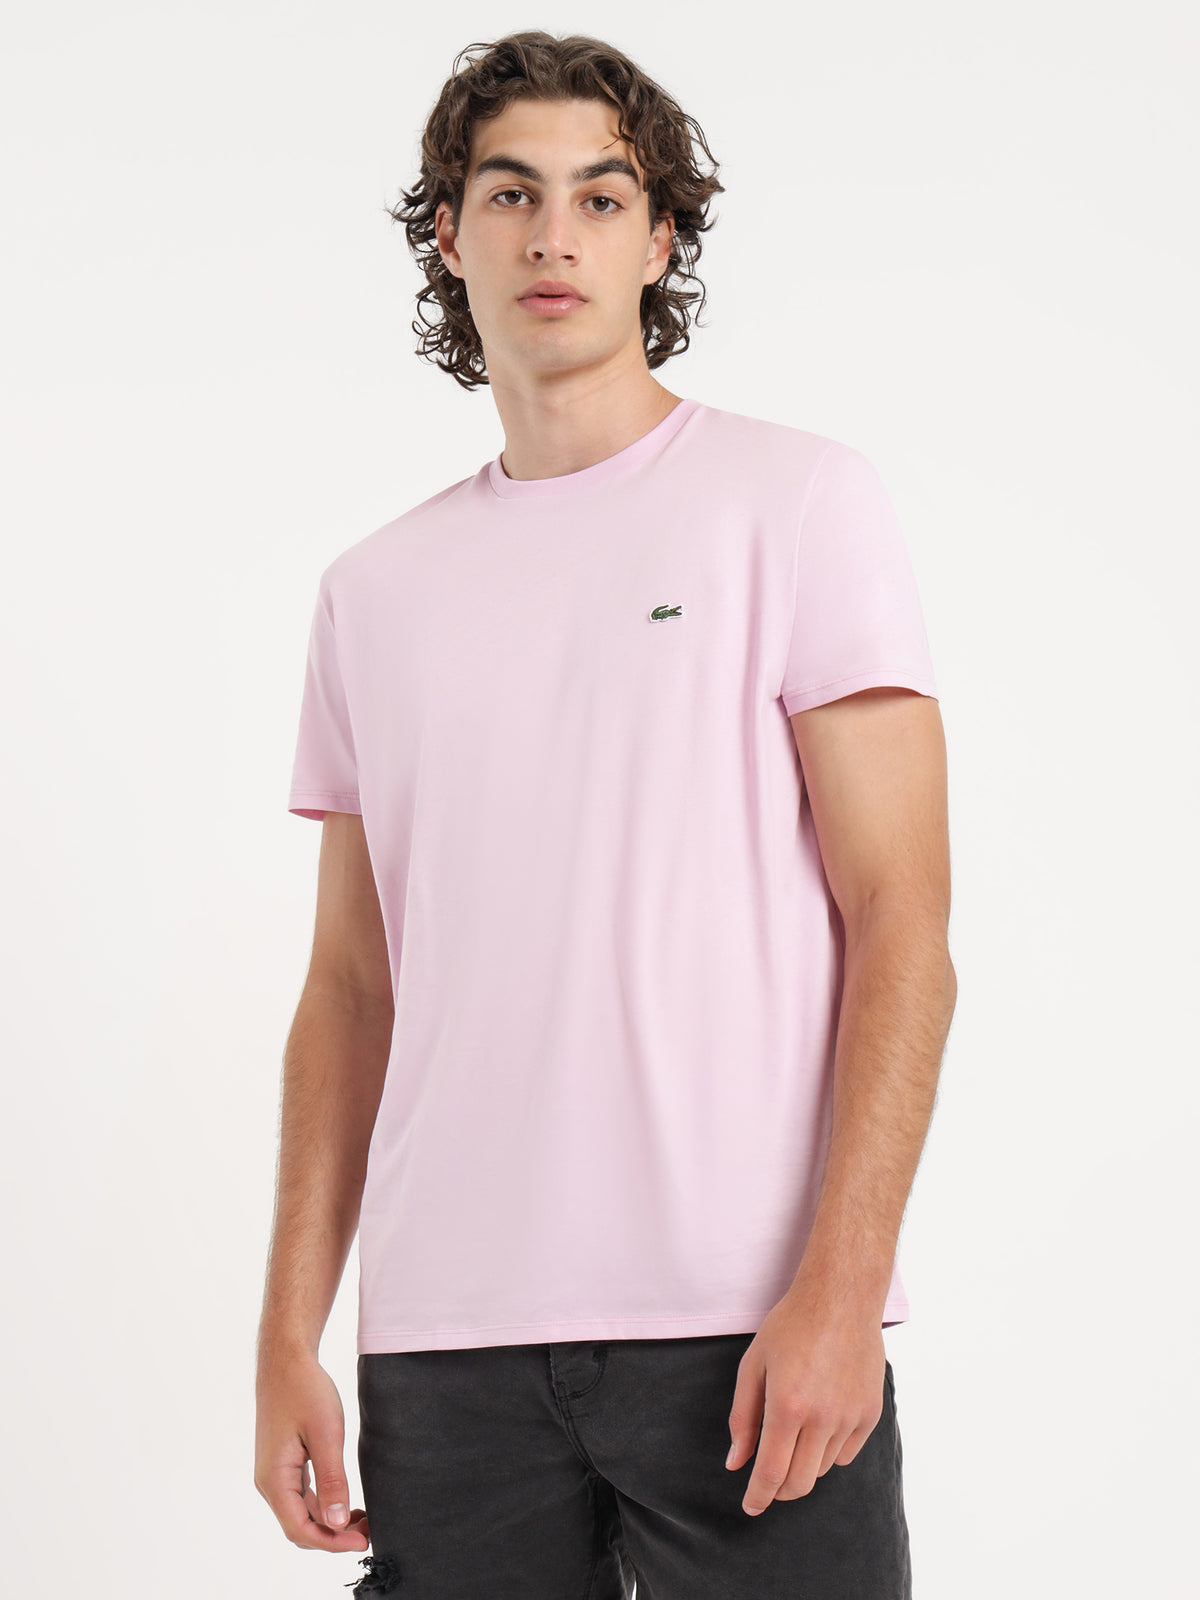 Classic Crew Neck T-Shirt in Pink